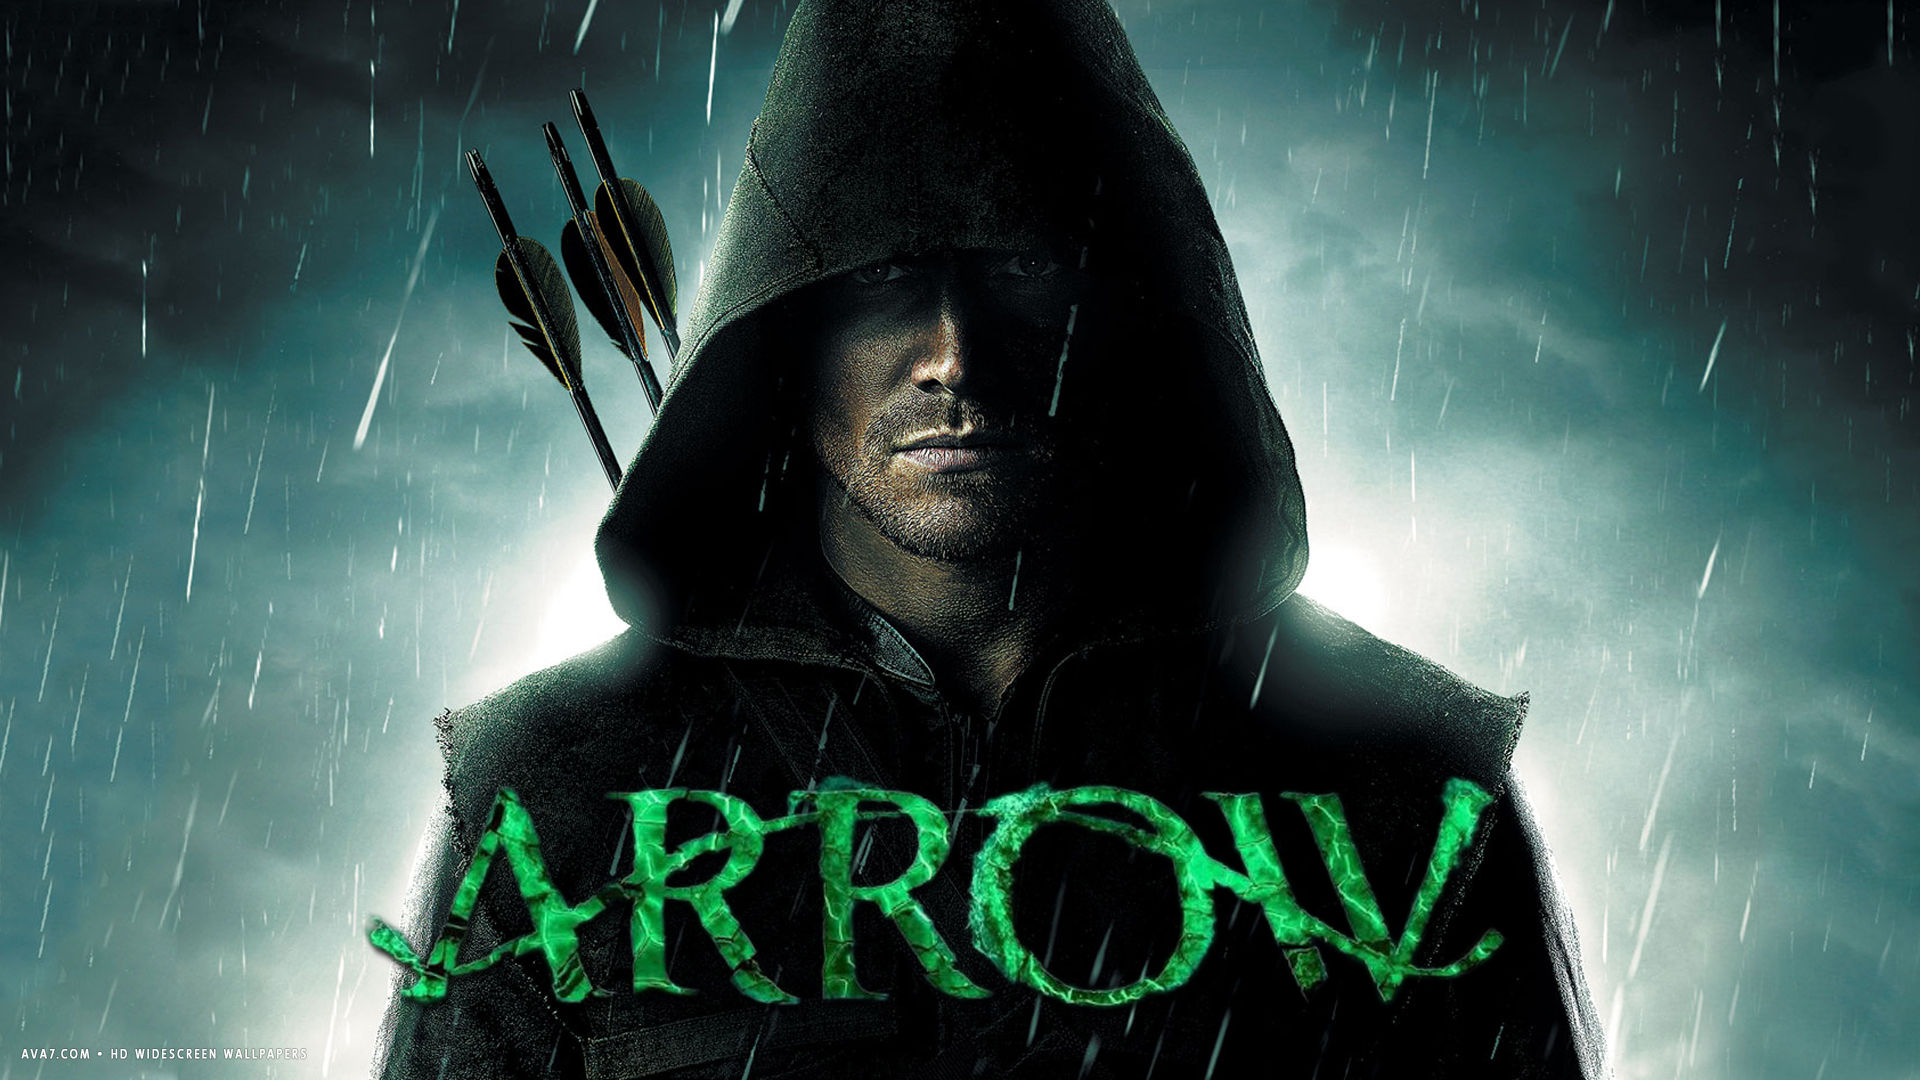 Arrow – “Brothers and Sisters”